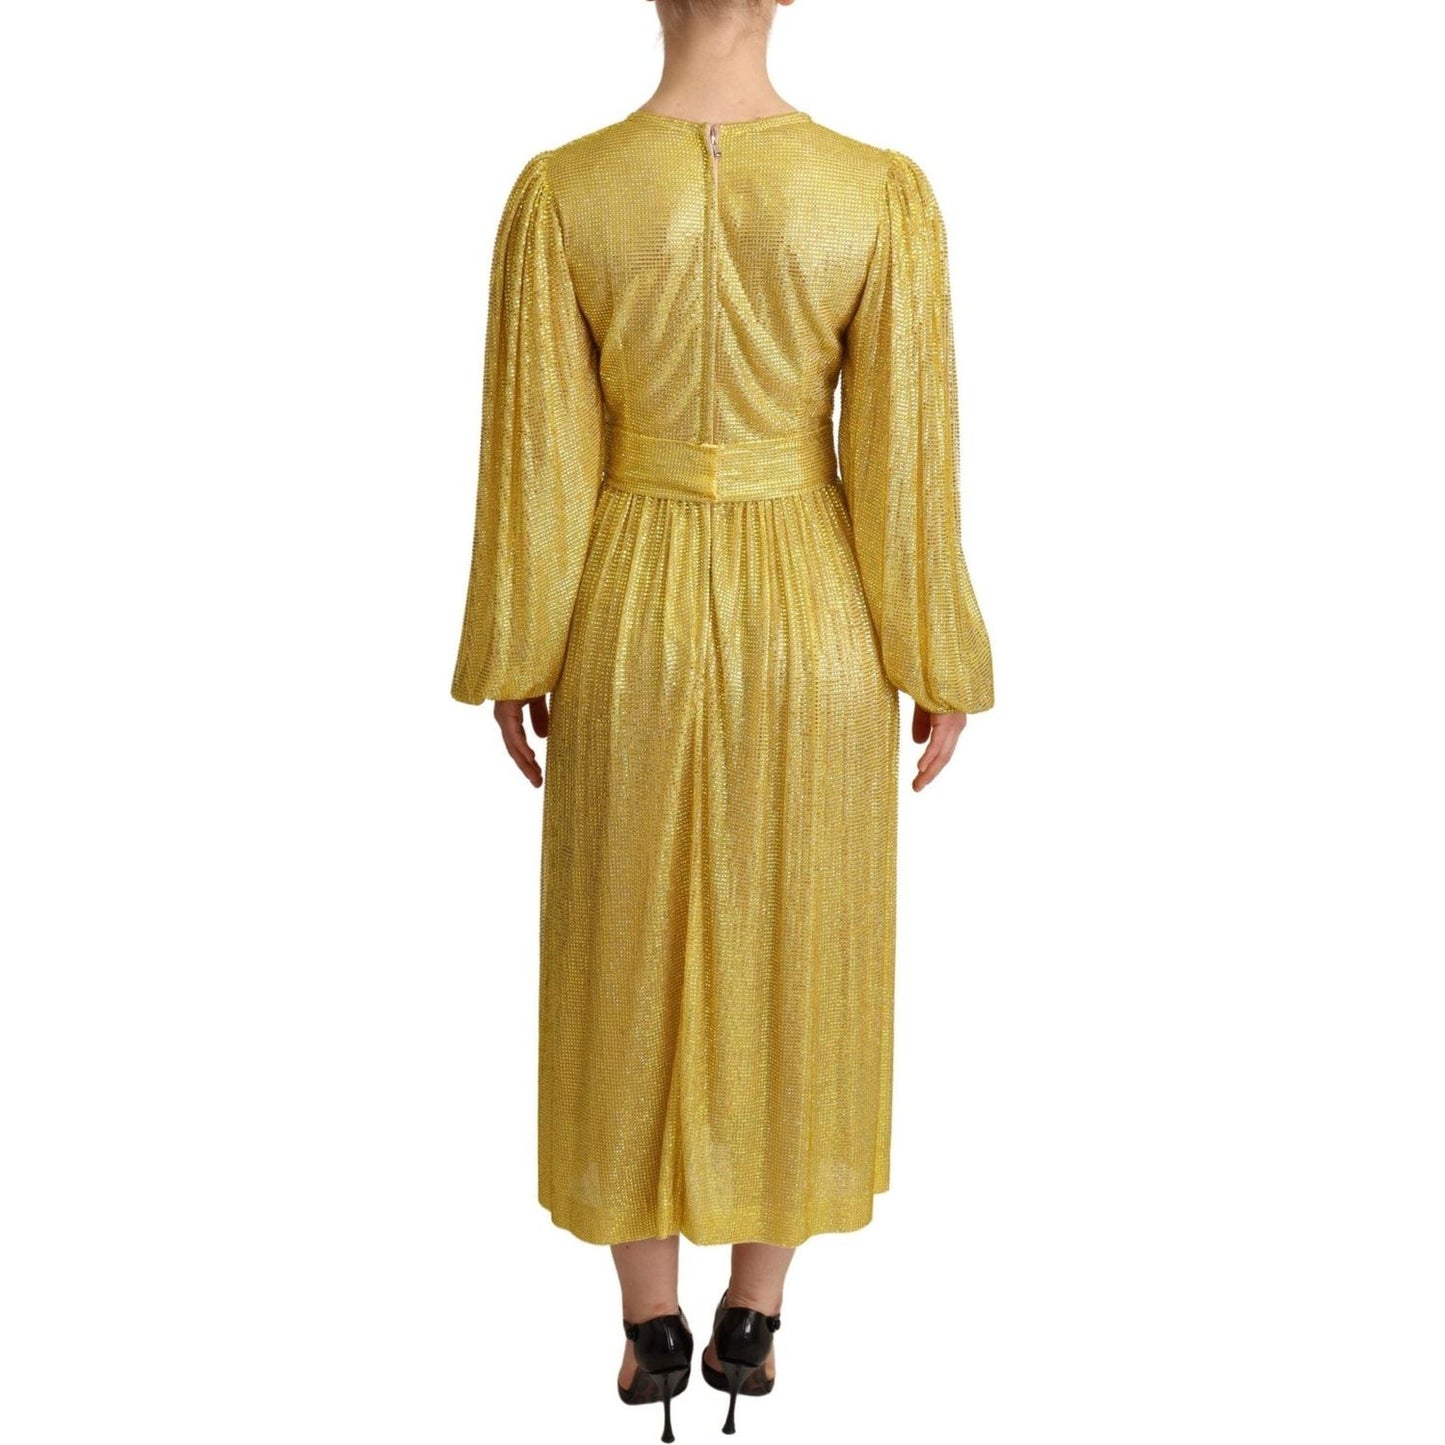 Dolce & Gabbana Crystal Embellished Pleated Maxi Dress WOMAN DRESSES yellow-crystal-mesh-pleated-maxi-dress